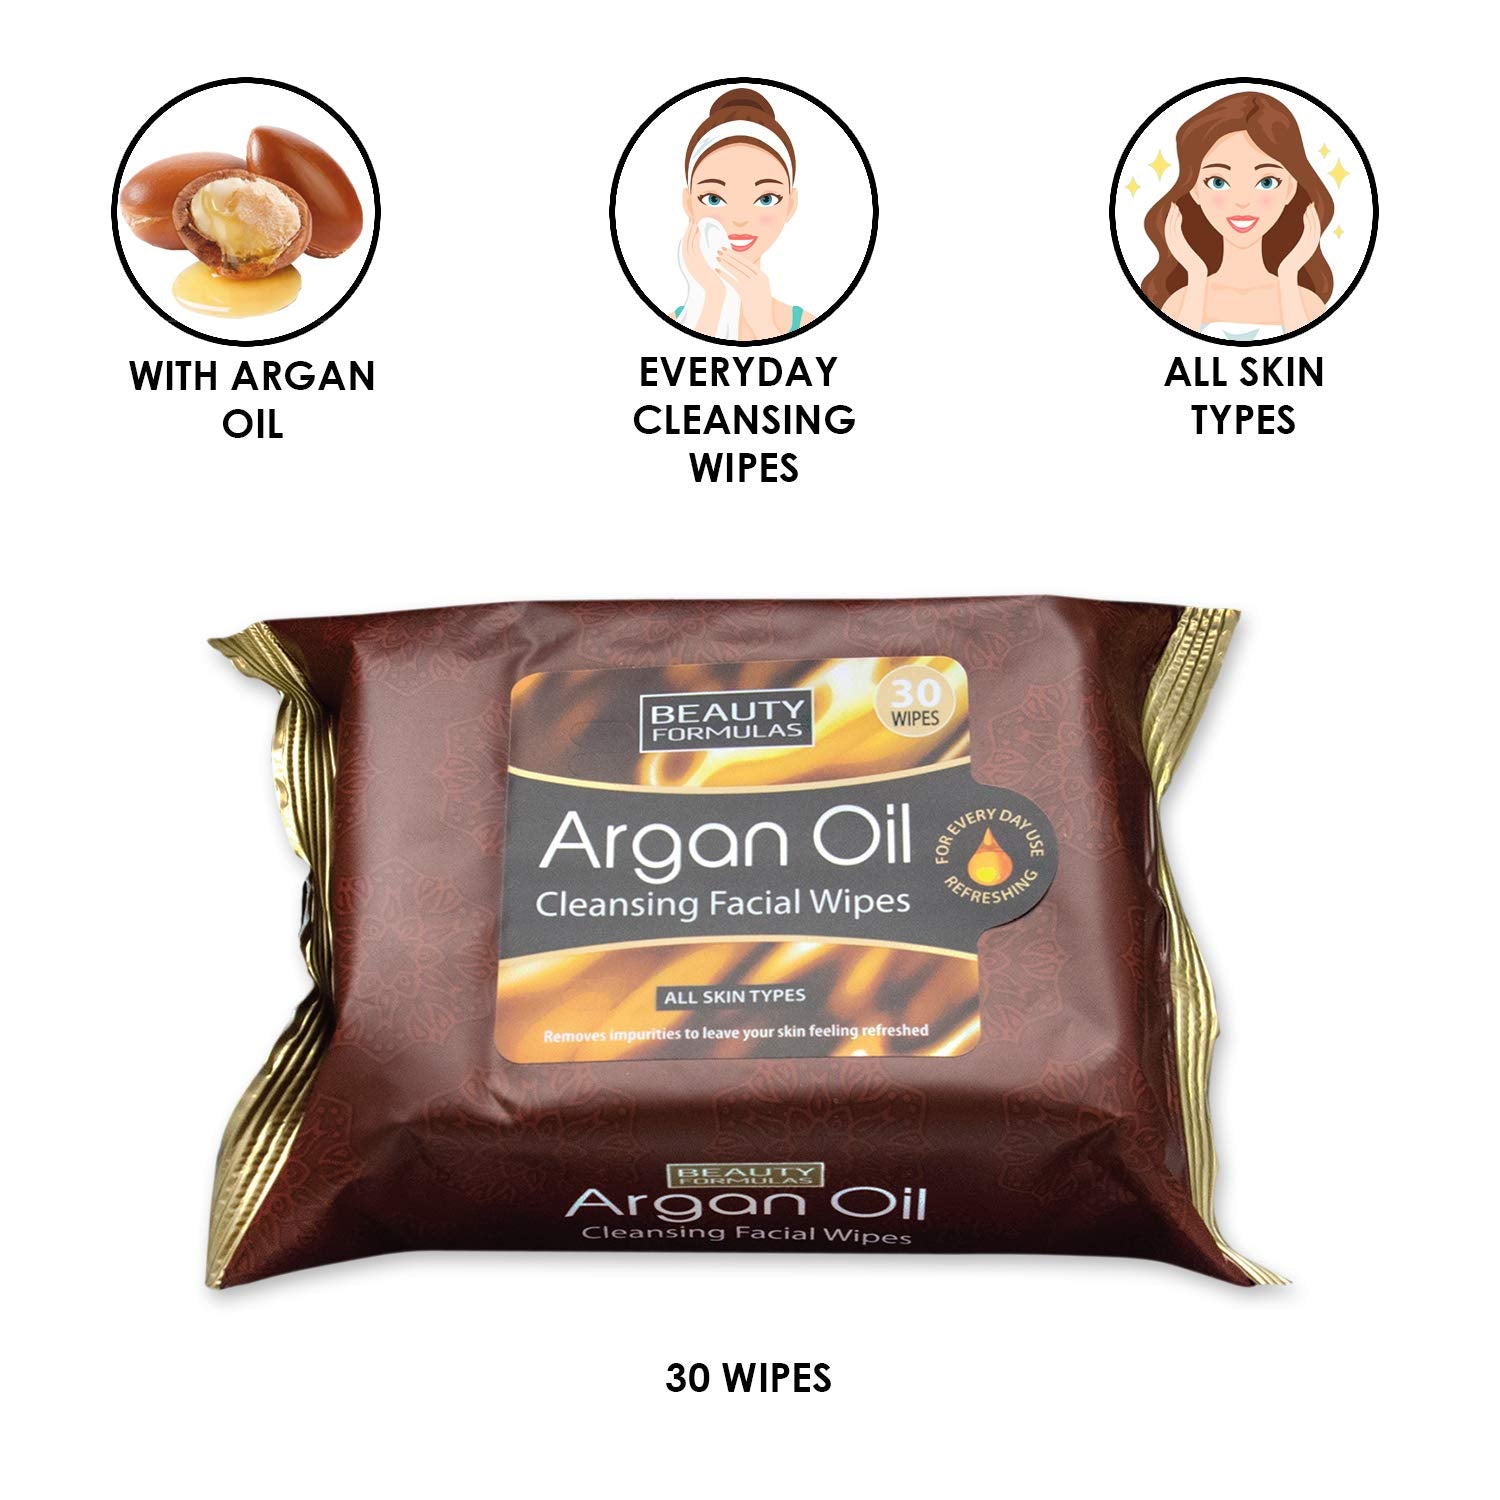 Beauty Formulas Argan Oil Cleansing Facial Wipes (30 Wipes)